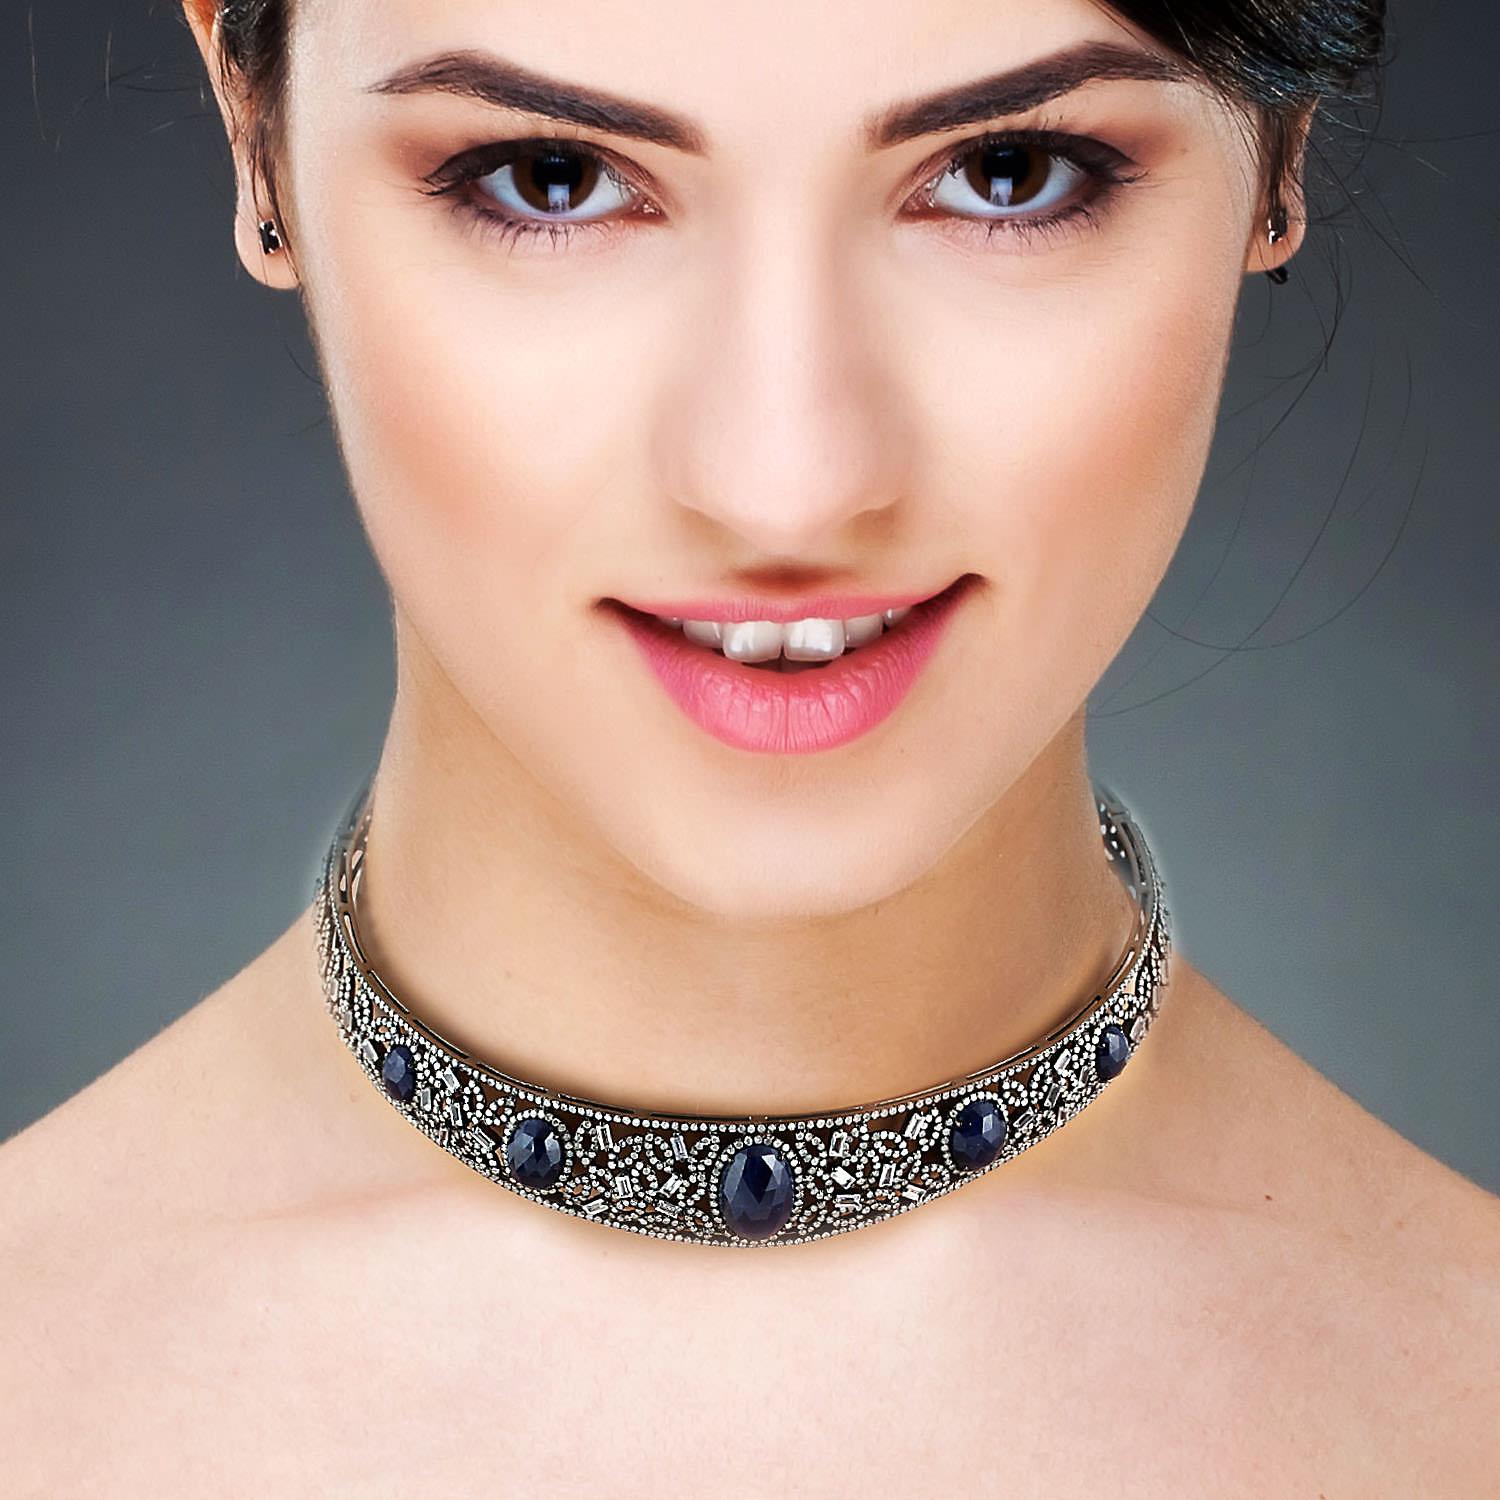 This choker necklace features a set of sparkling oval-shaped sapphires and pave diamonds in a combination of 18k gold and silver. The centerpiece of the necklace is the row of stunning oval sapphires, which add pops of color and sparkle to the